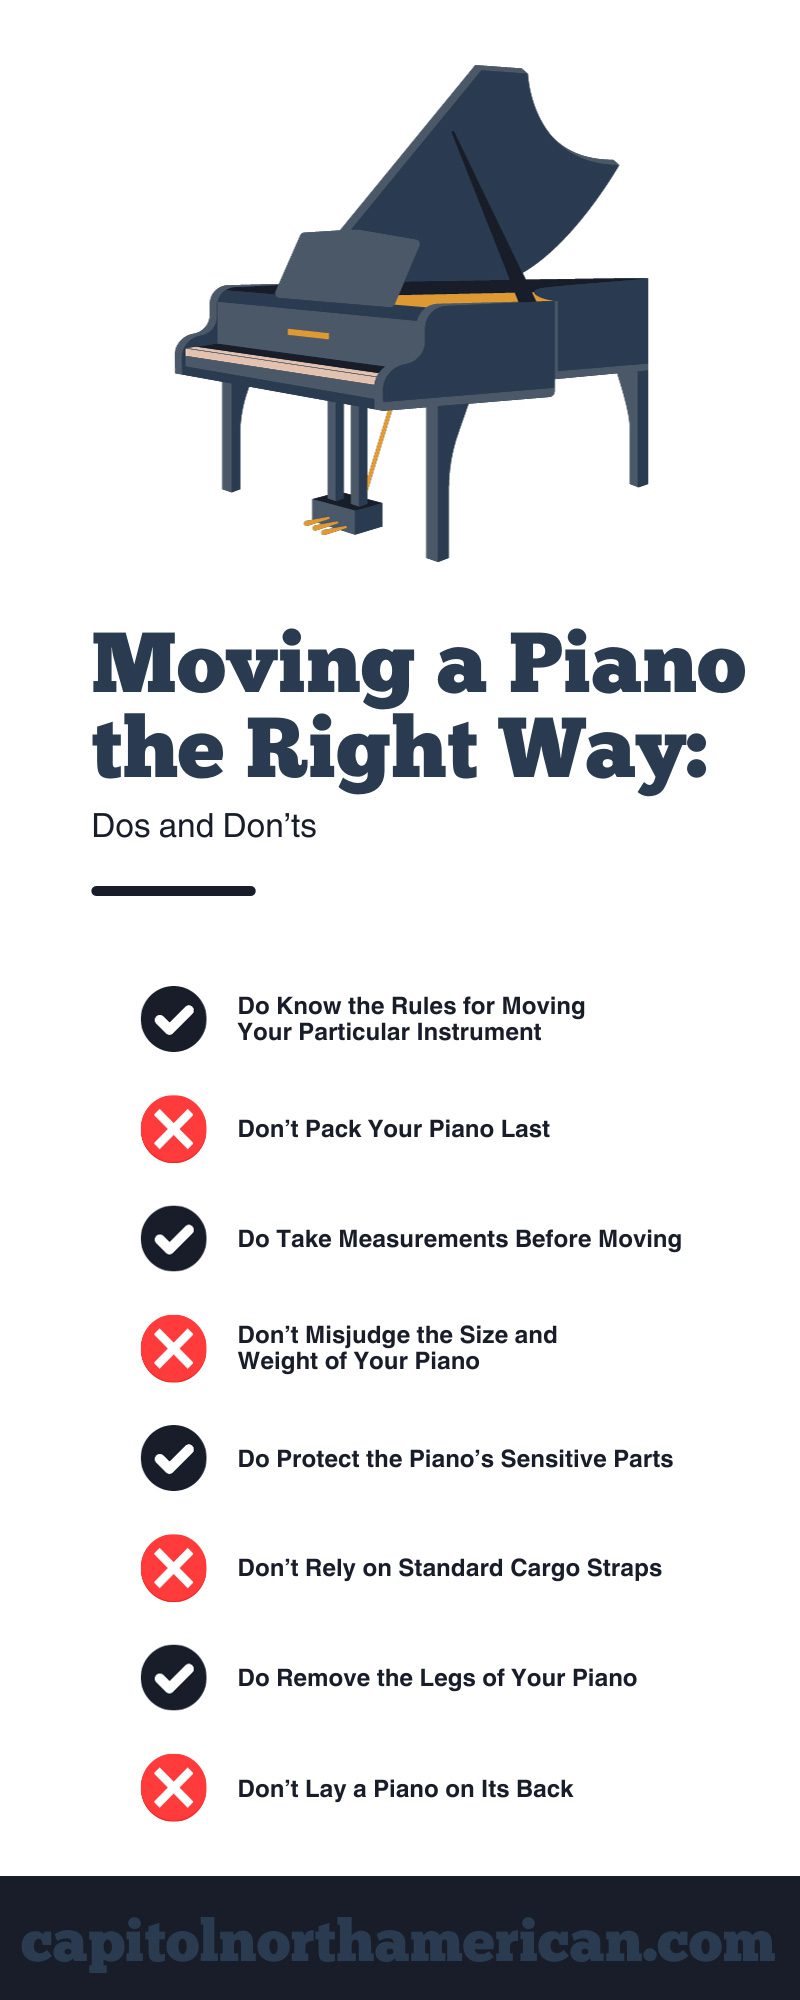 Moving a Piano the Right Way: Dos and Don’ts